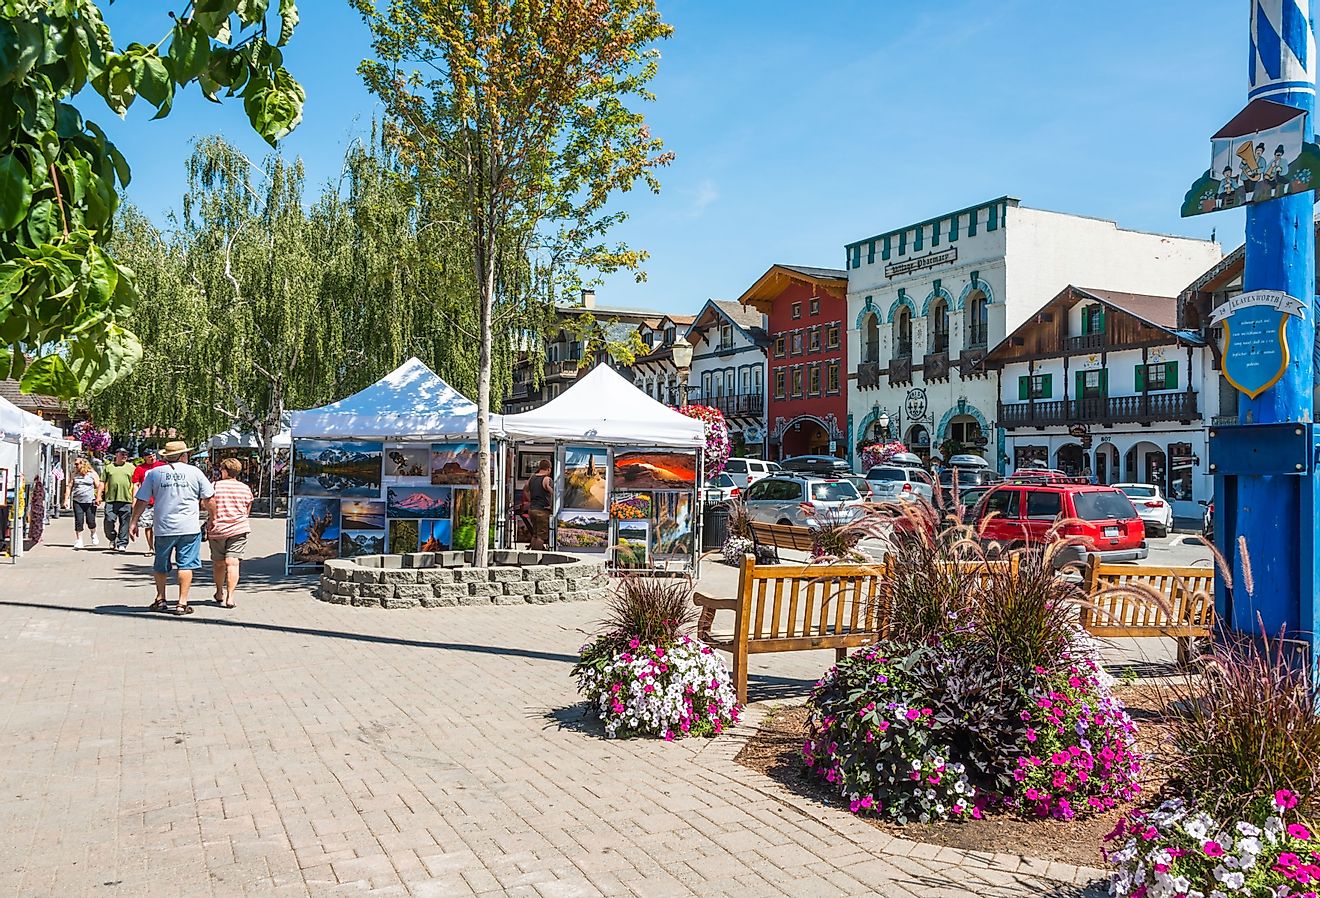 Main tourist street with art show and Bavarian style buildings in Leavenworth, Washington. Image credit Denise Lett via Shutterstock